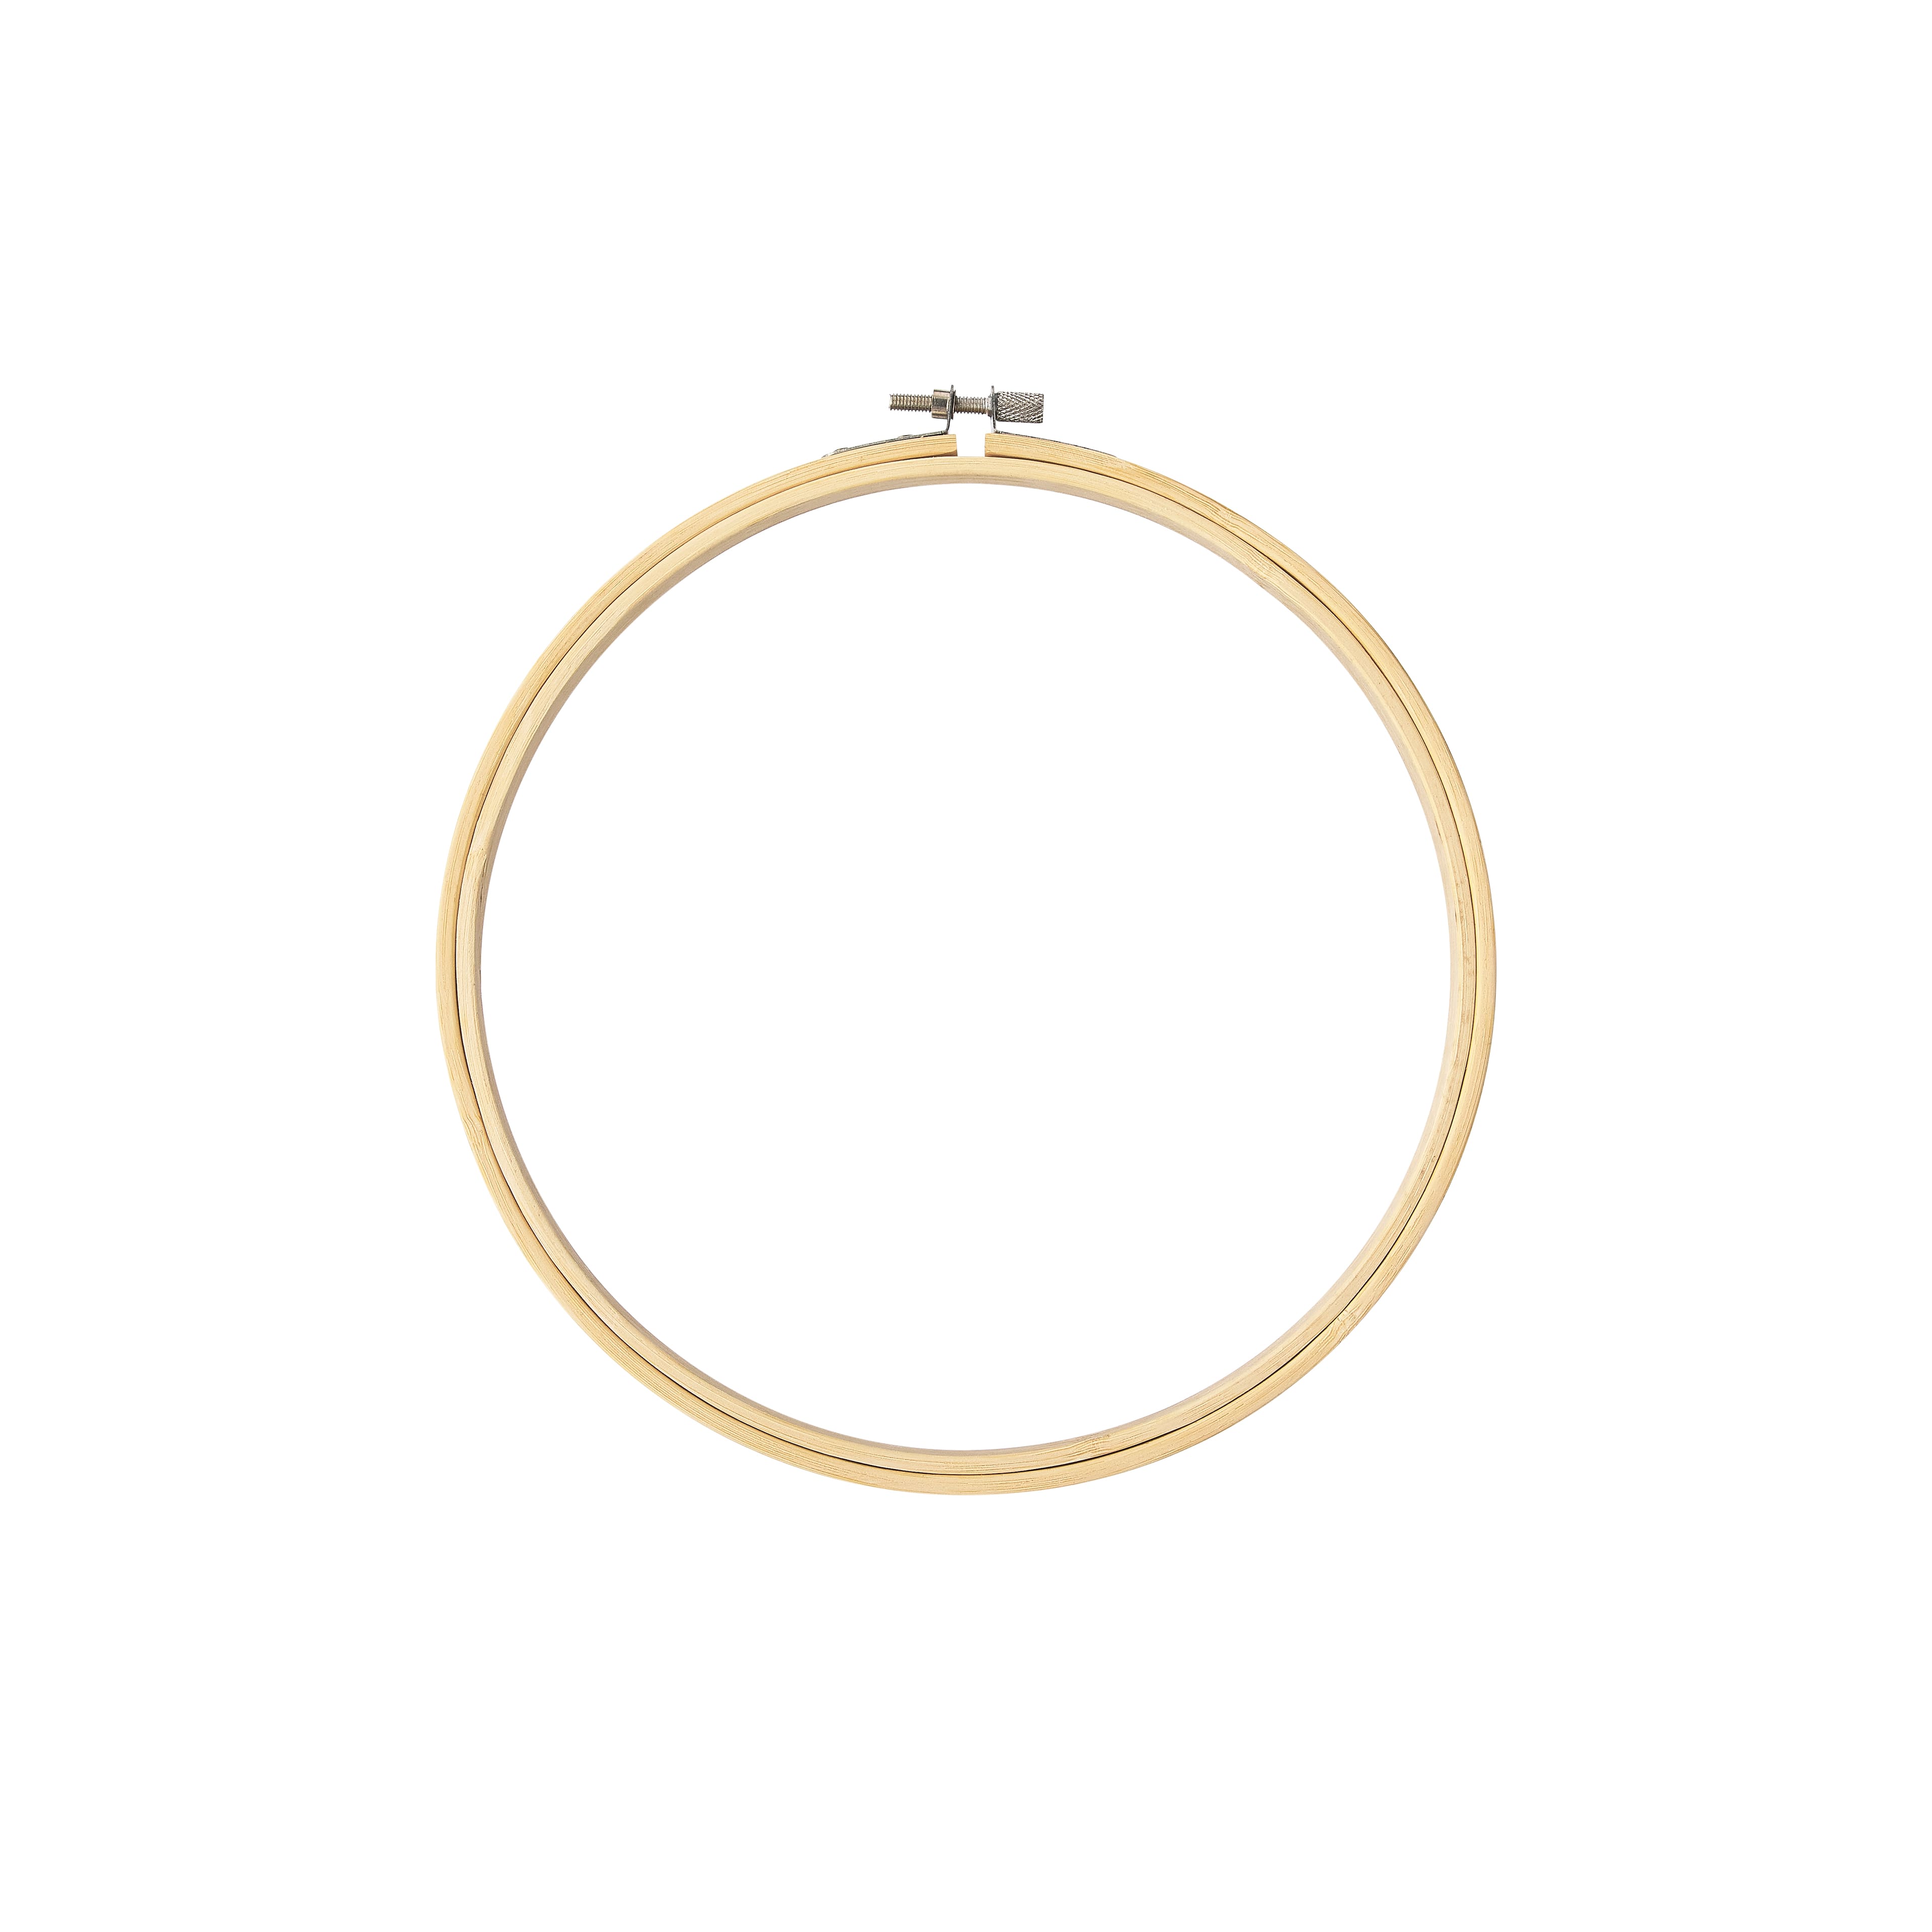 Premium Hard Wood Embroidery Hoops - Square - Stitched Modern